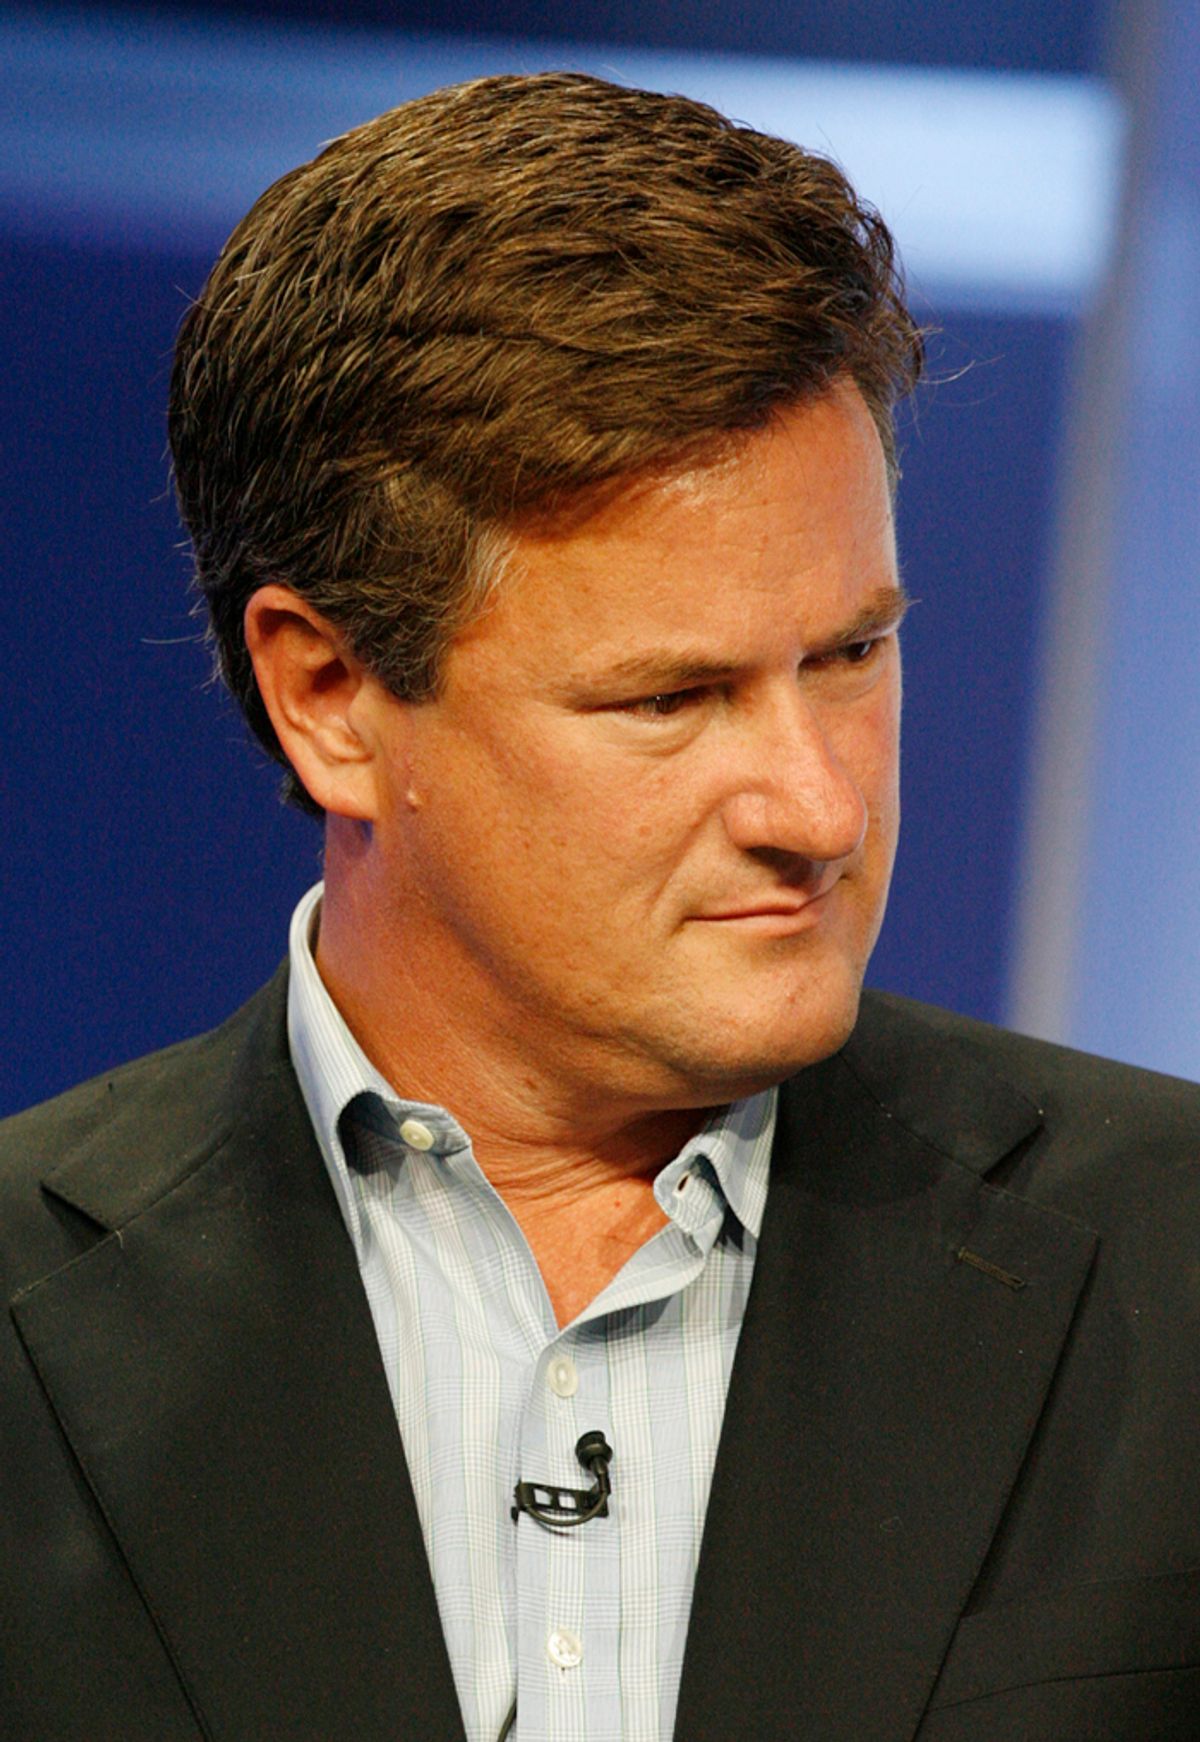 Joe Scarborough, host of "Morning Joe", takes part in the NBC News Decision '08 panel at the NBC Universal summer press tour  in Beverly Hills, California July 21, 2008.  REUTERS/Fred Prouser       (UNITED STATES)     (Â© Fred Prouser / Reuters)